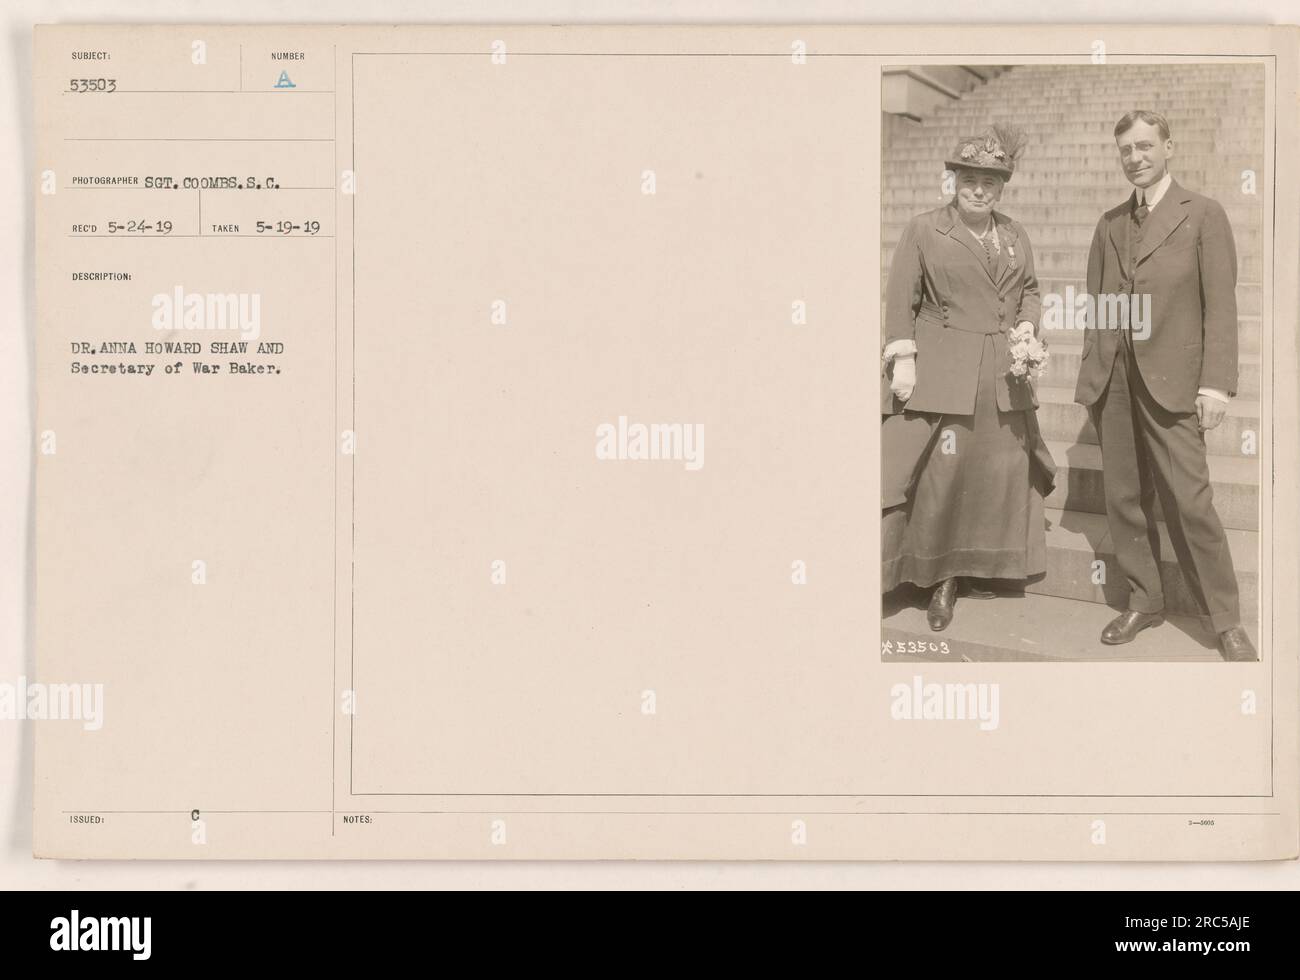 Dr. Anna Howard Shaw and Secretary of War Baker are seen wearing gloves in this photograph, taken on May 19, 1919. The photographer is Sot. Coombs, while the description number is 53503. These details were recorded on May 24, 1919. Stock Photo